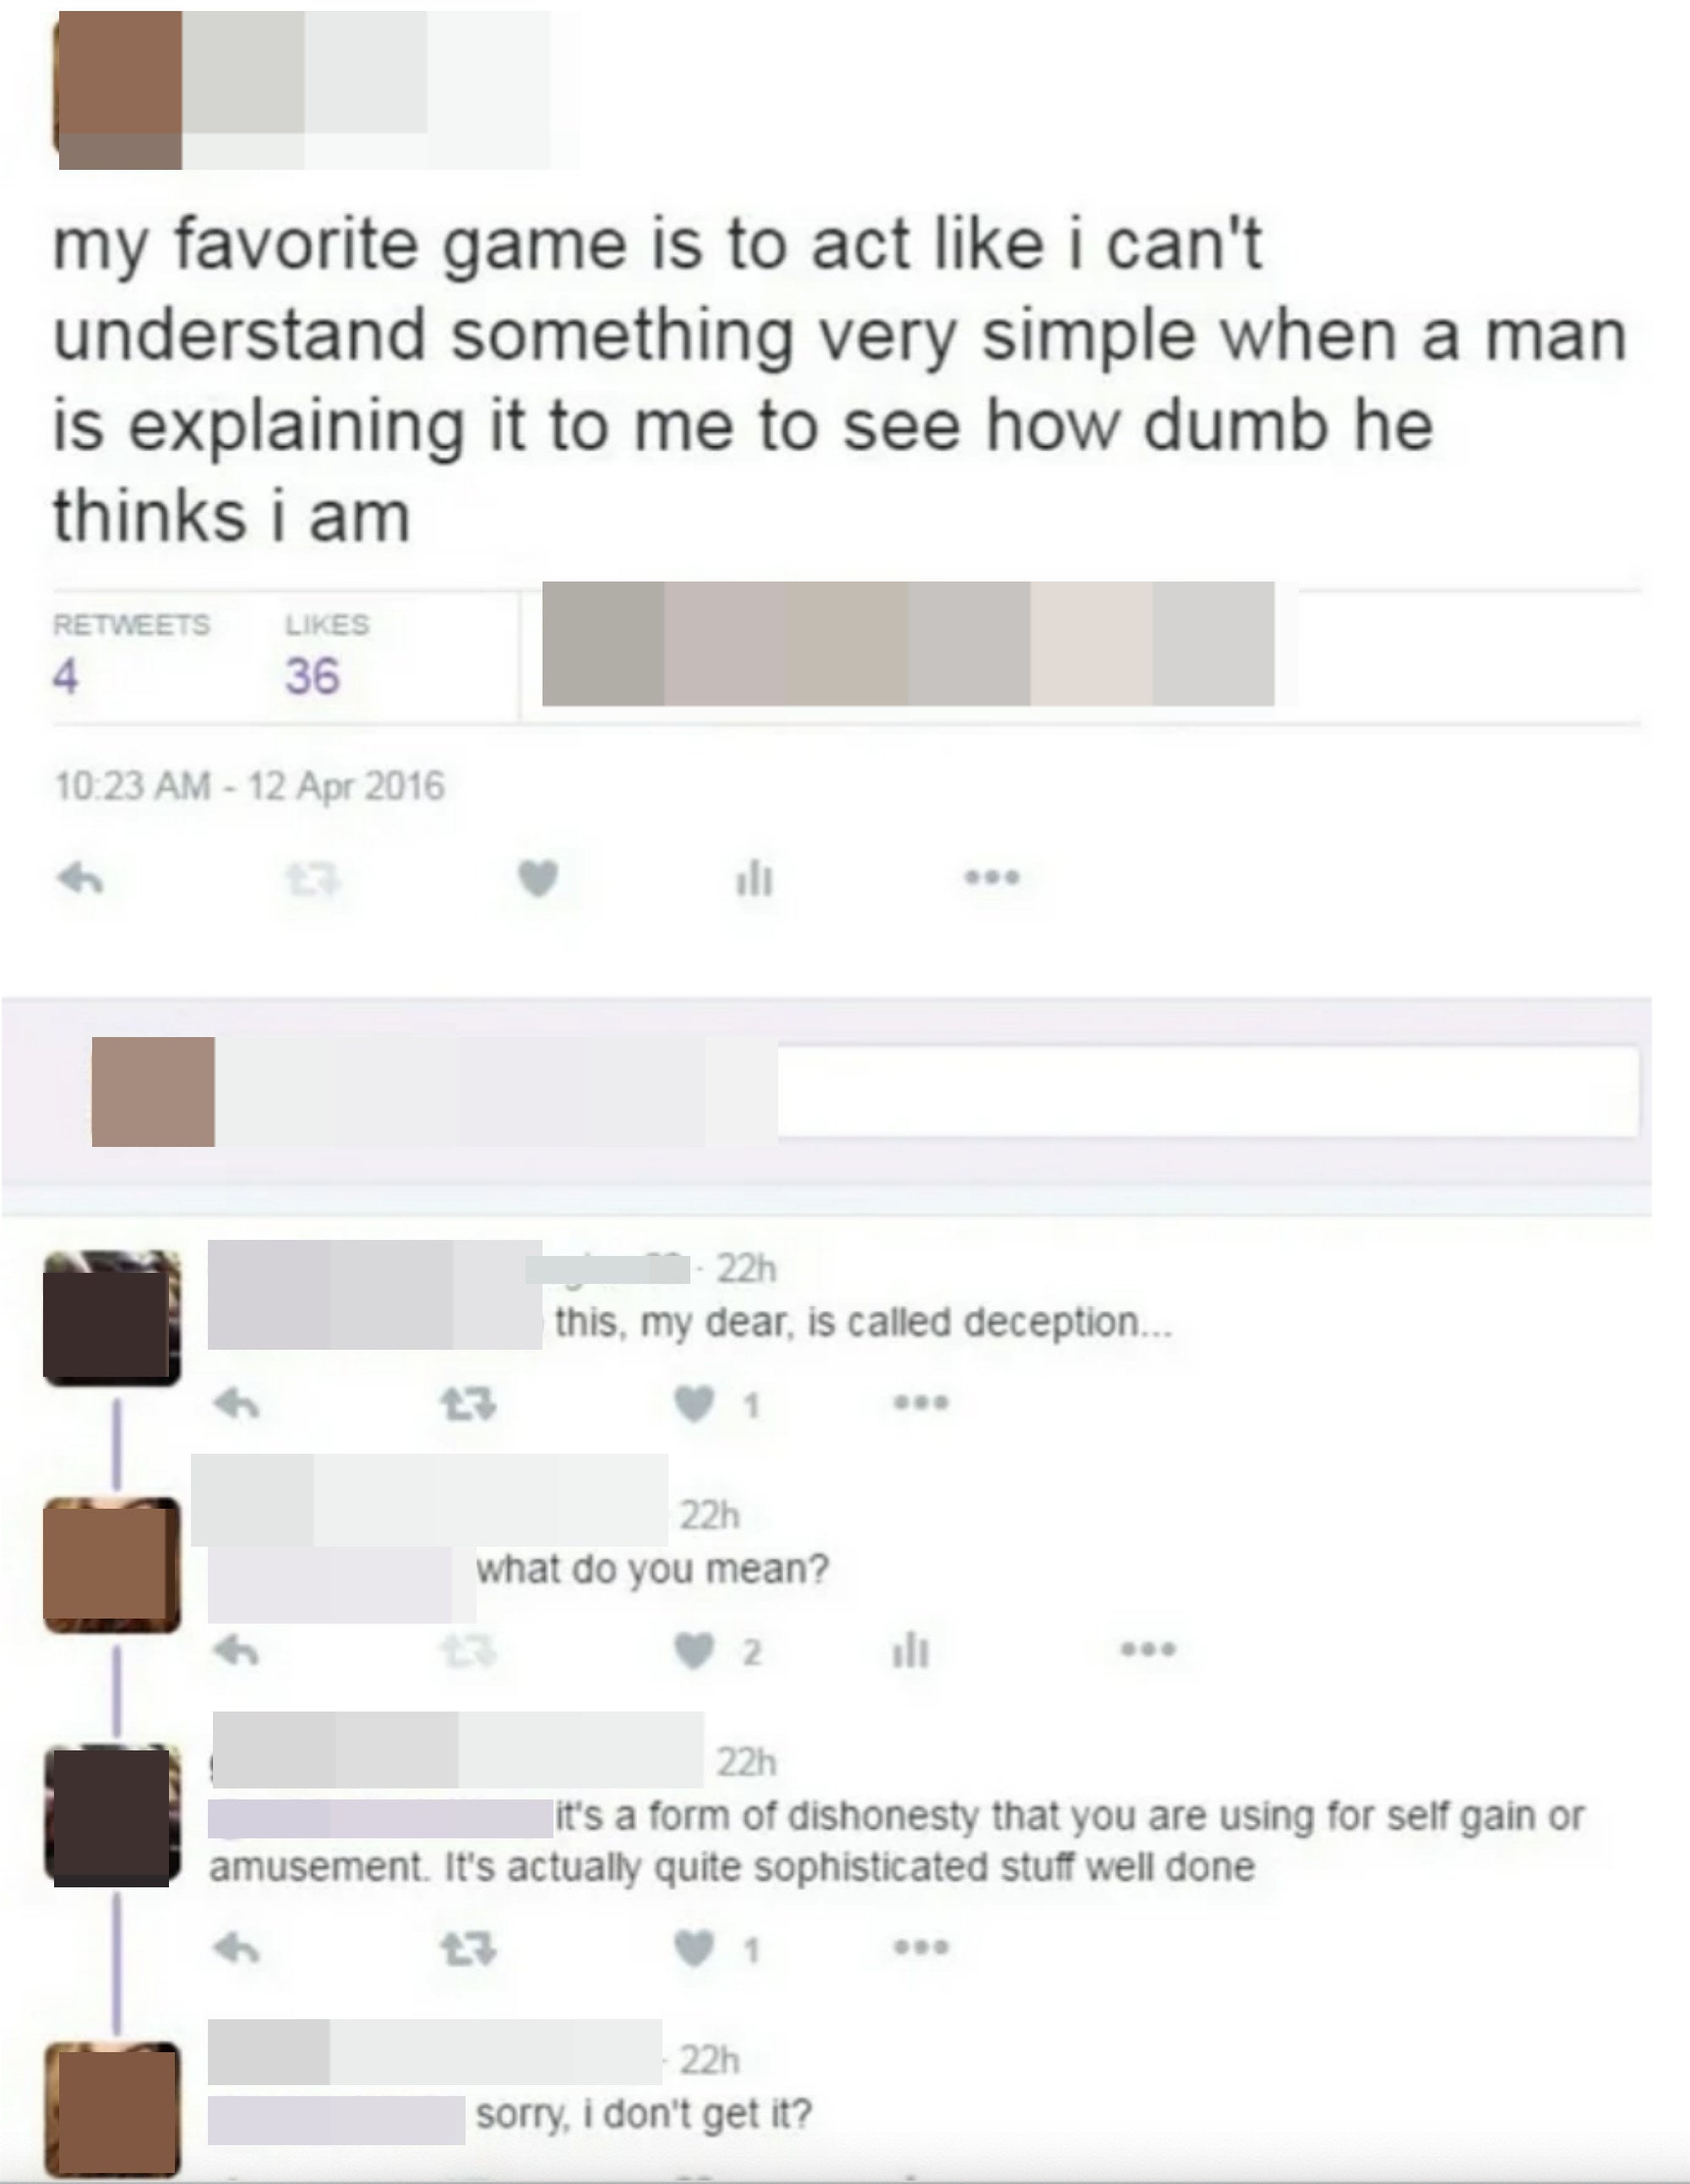 woman saying she pretends to be dumb to see how much a man thinks she really is dumb